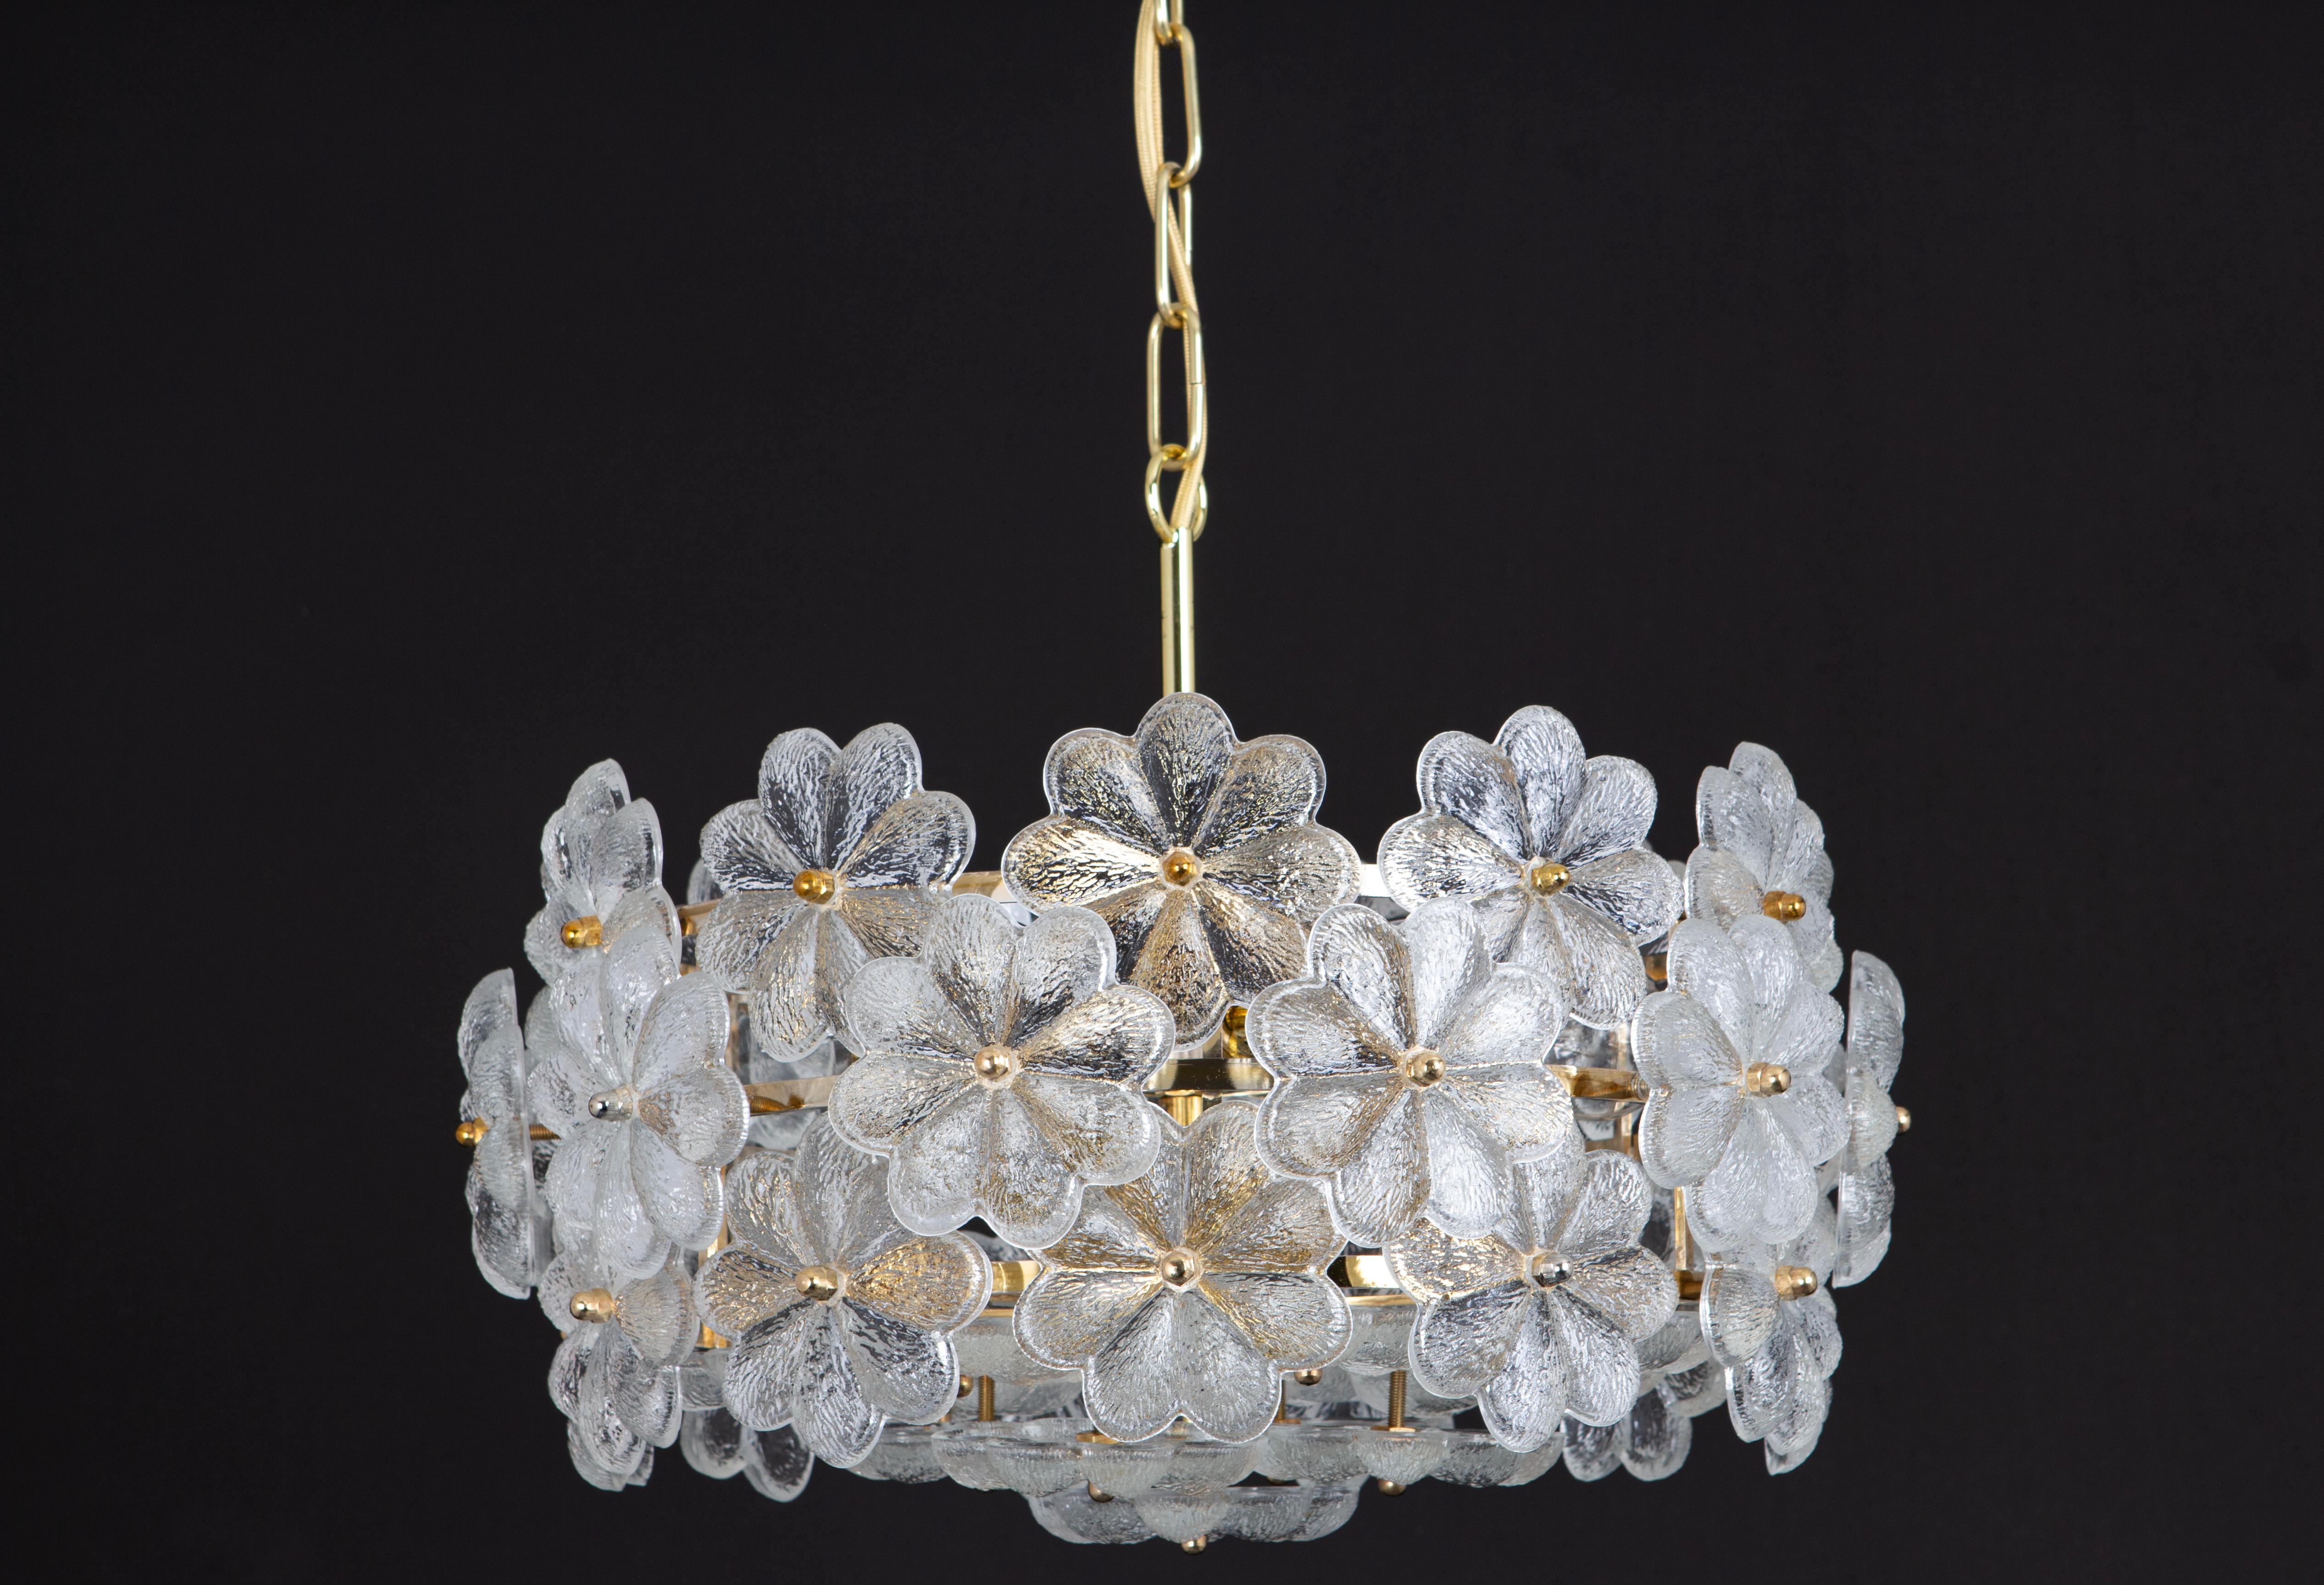 1 of 2 Stunning Petite Murano Glass Chandelier by Ernst Palme, Germany, 1970s For Sale 3